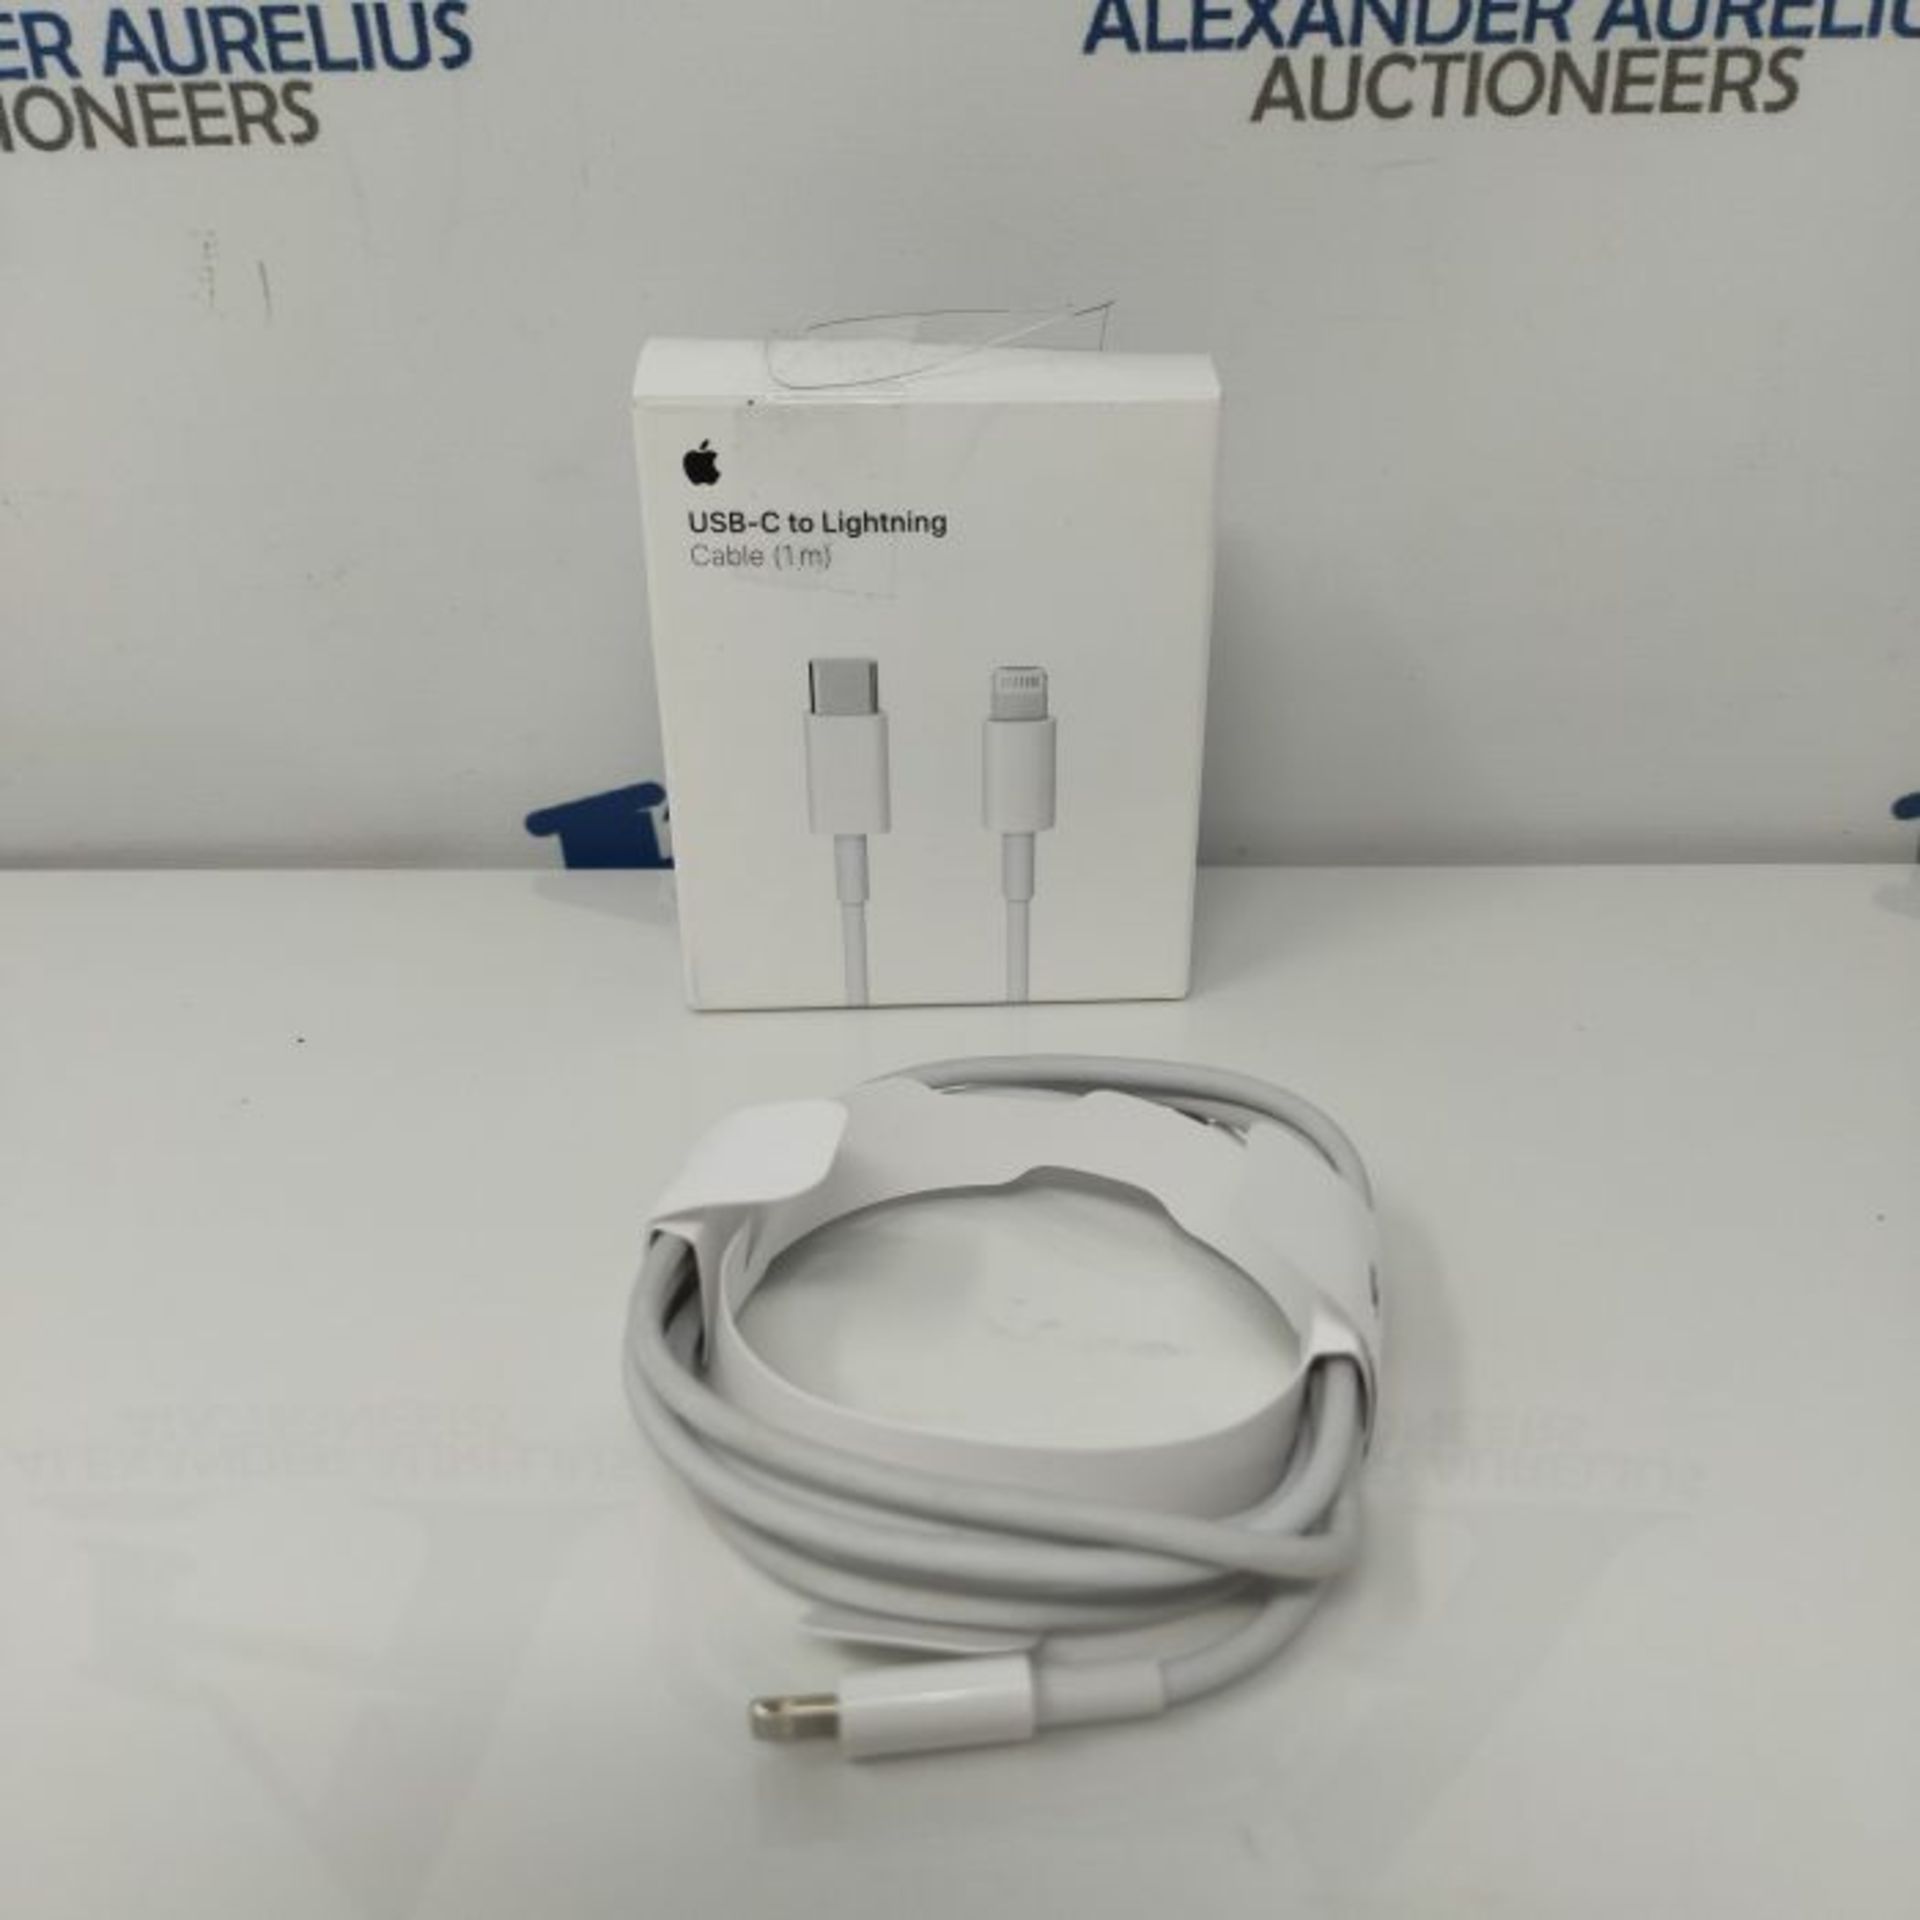 Apple USB-C to Lightning Cable (1m) - Image 2 of 3